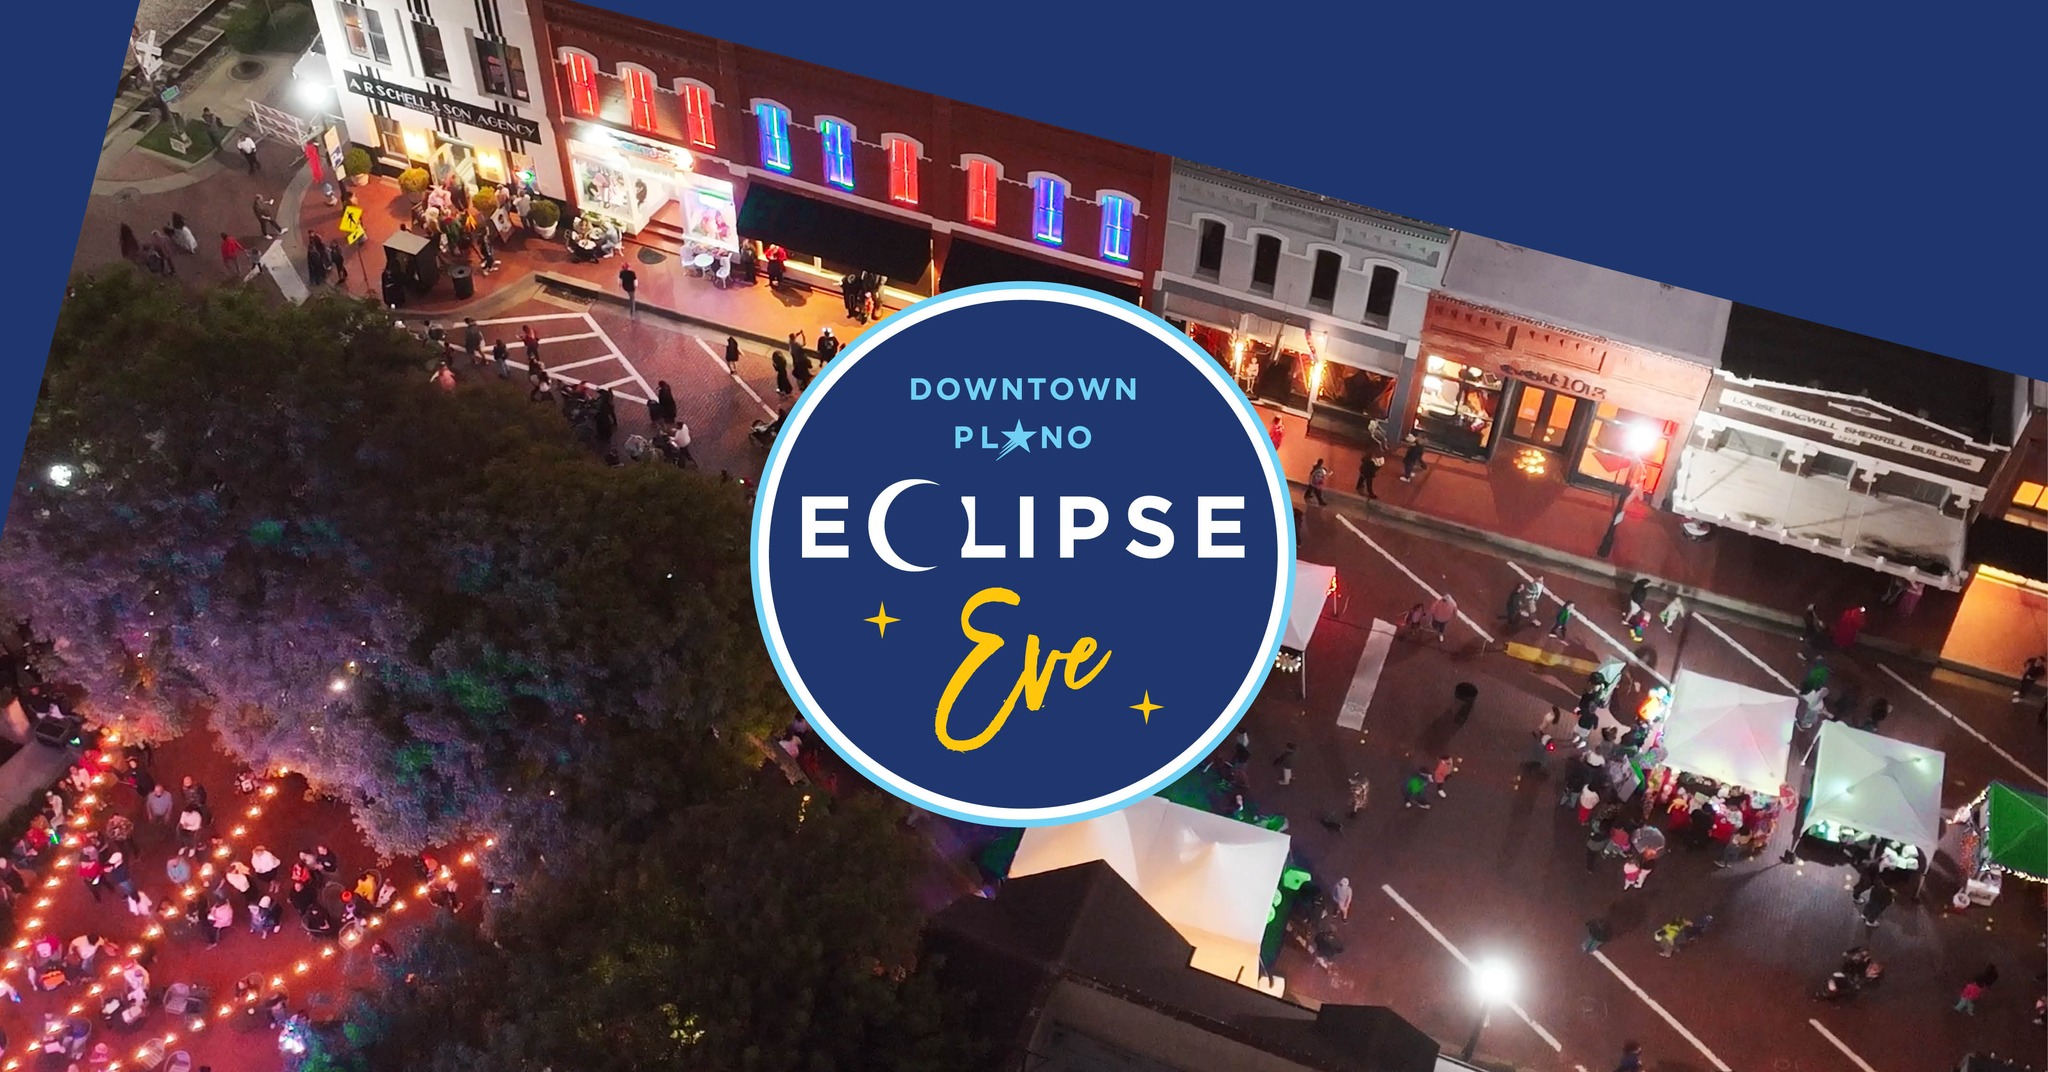 Downtown Plano Eclipse Eve Party